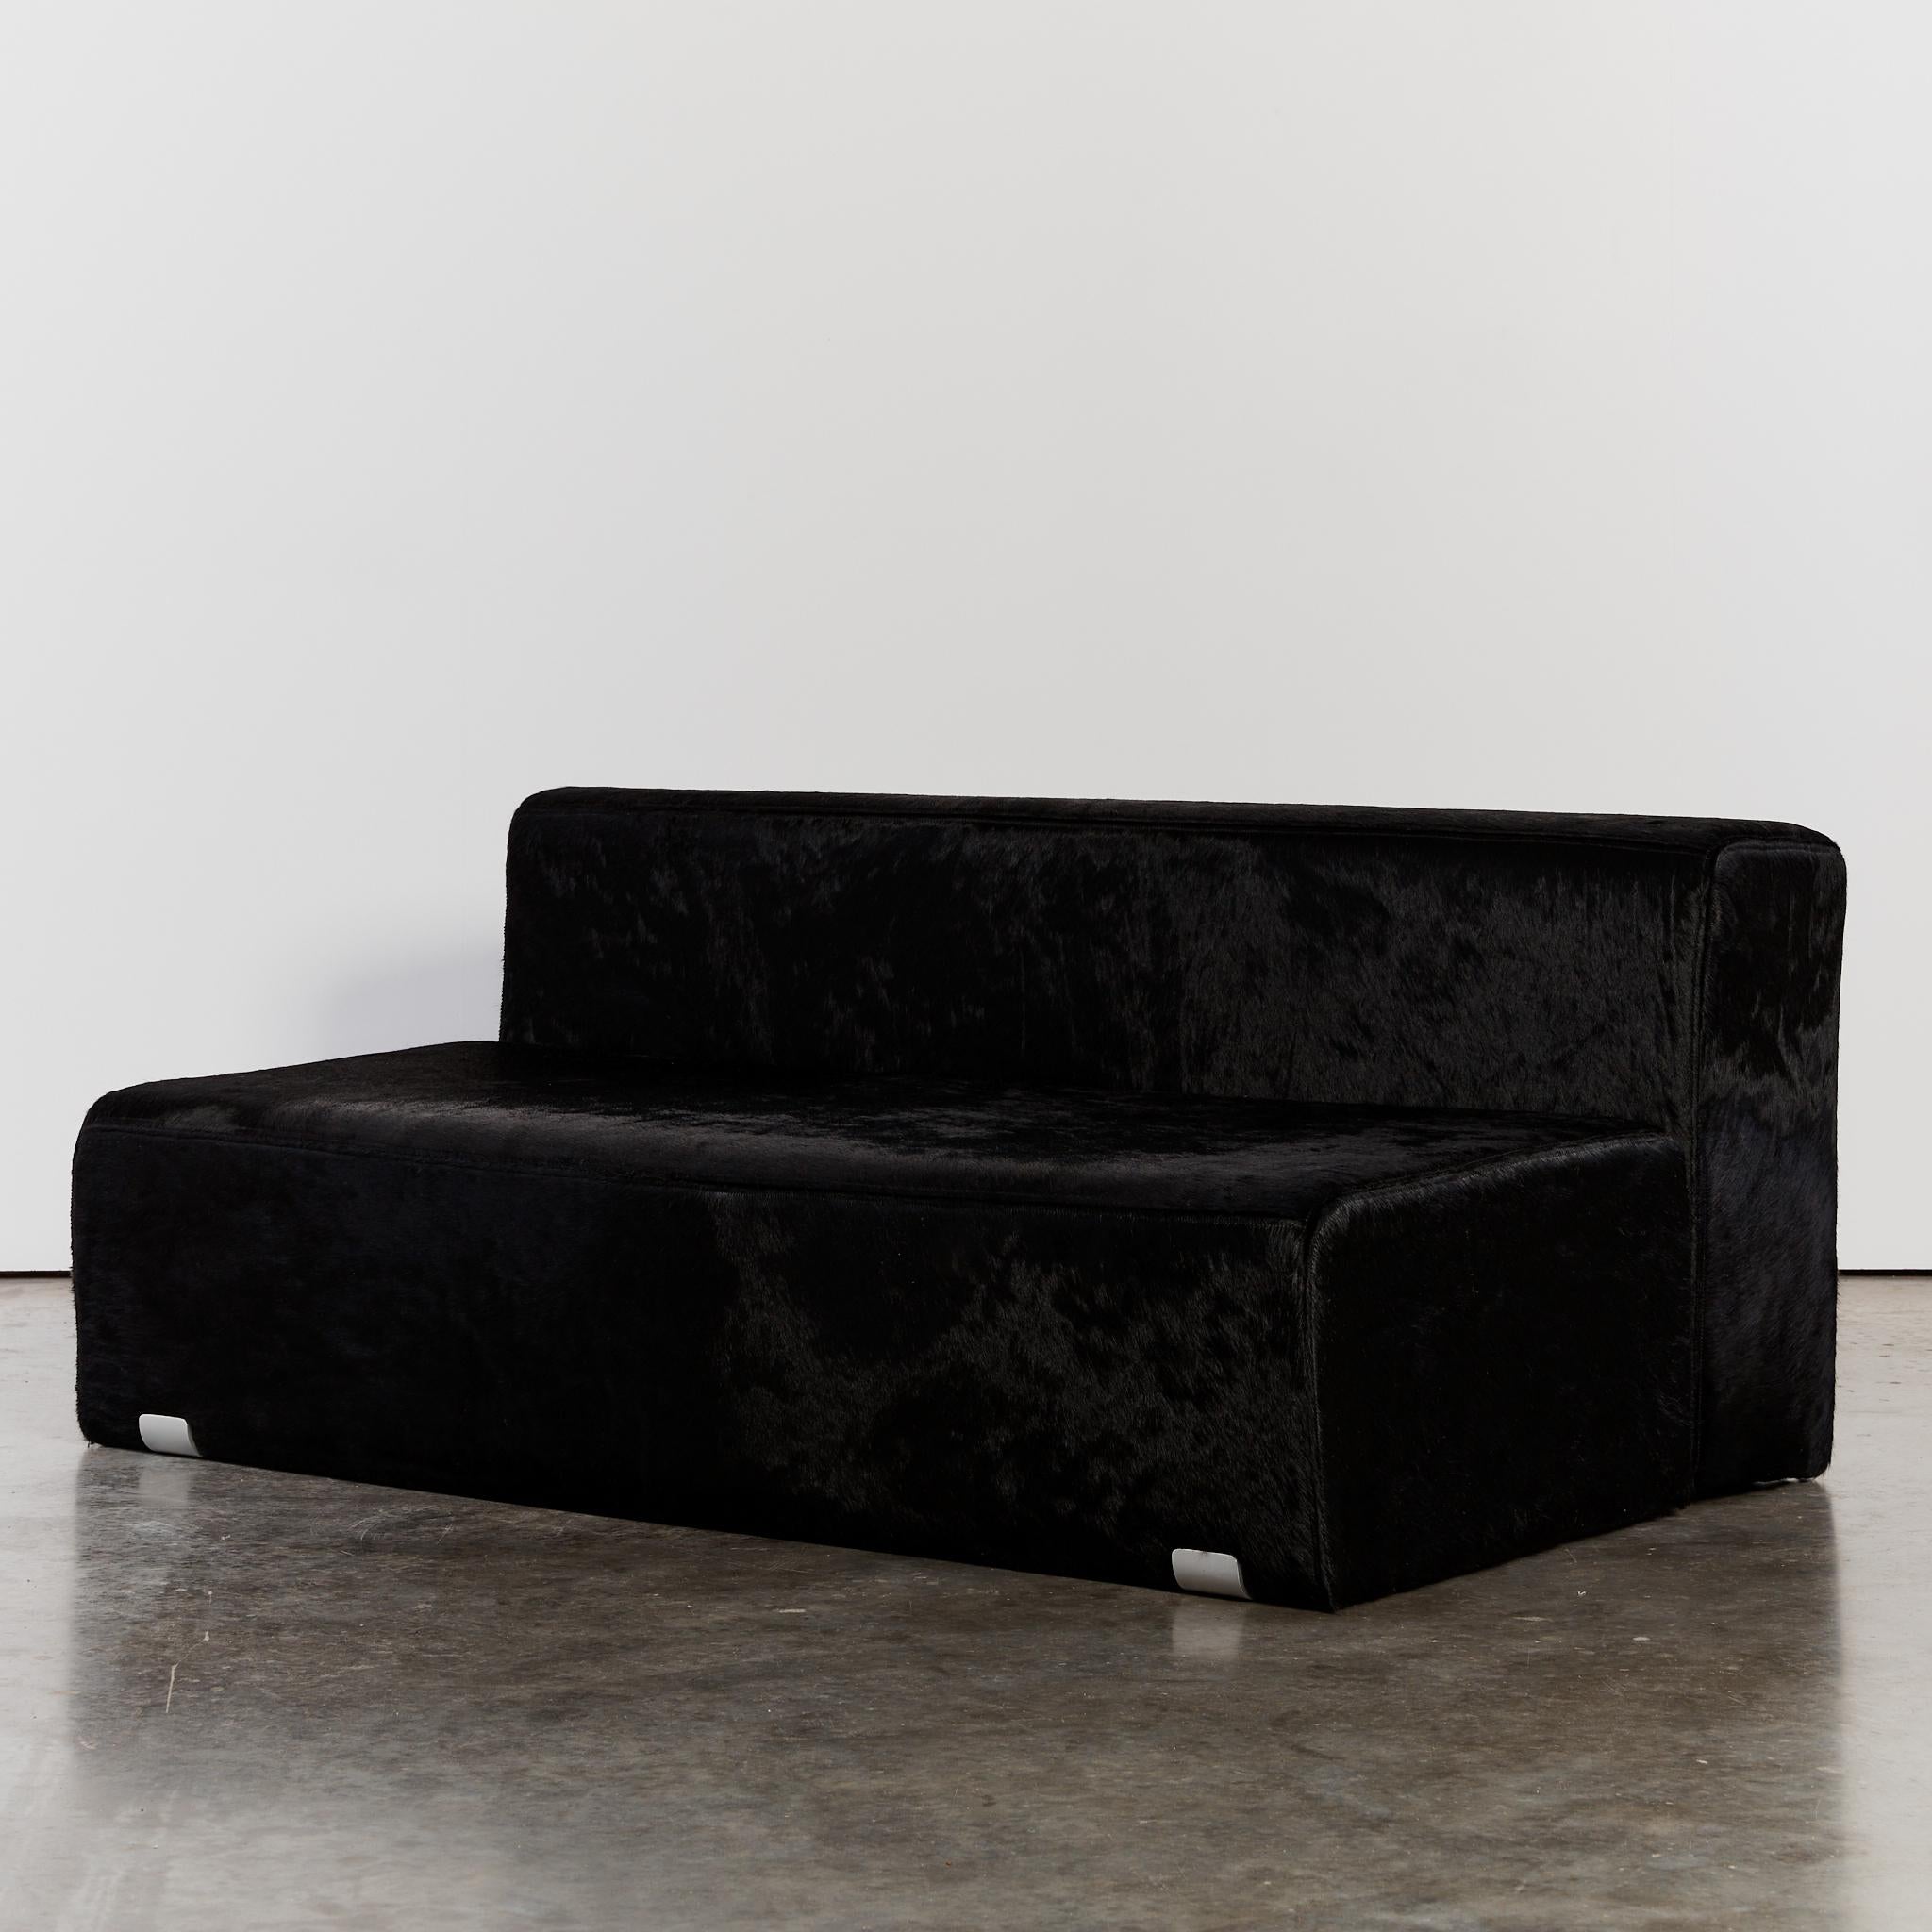 With is its minimalist form, the Marcel sofa is a design classic, featuring exposed aluminium brackets and has been reupholstered in sustainably sourced hair on hide.

Designed by Kazuhide Takahama as part of his long standing collaboration with